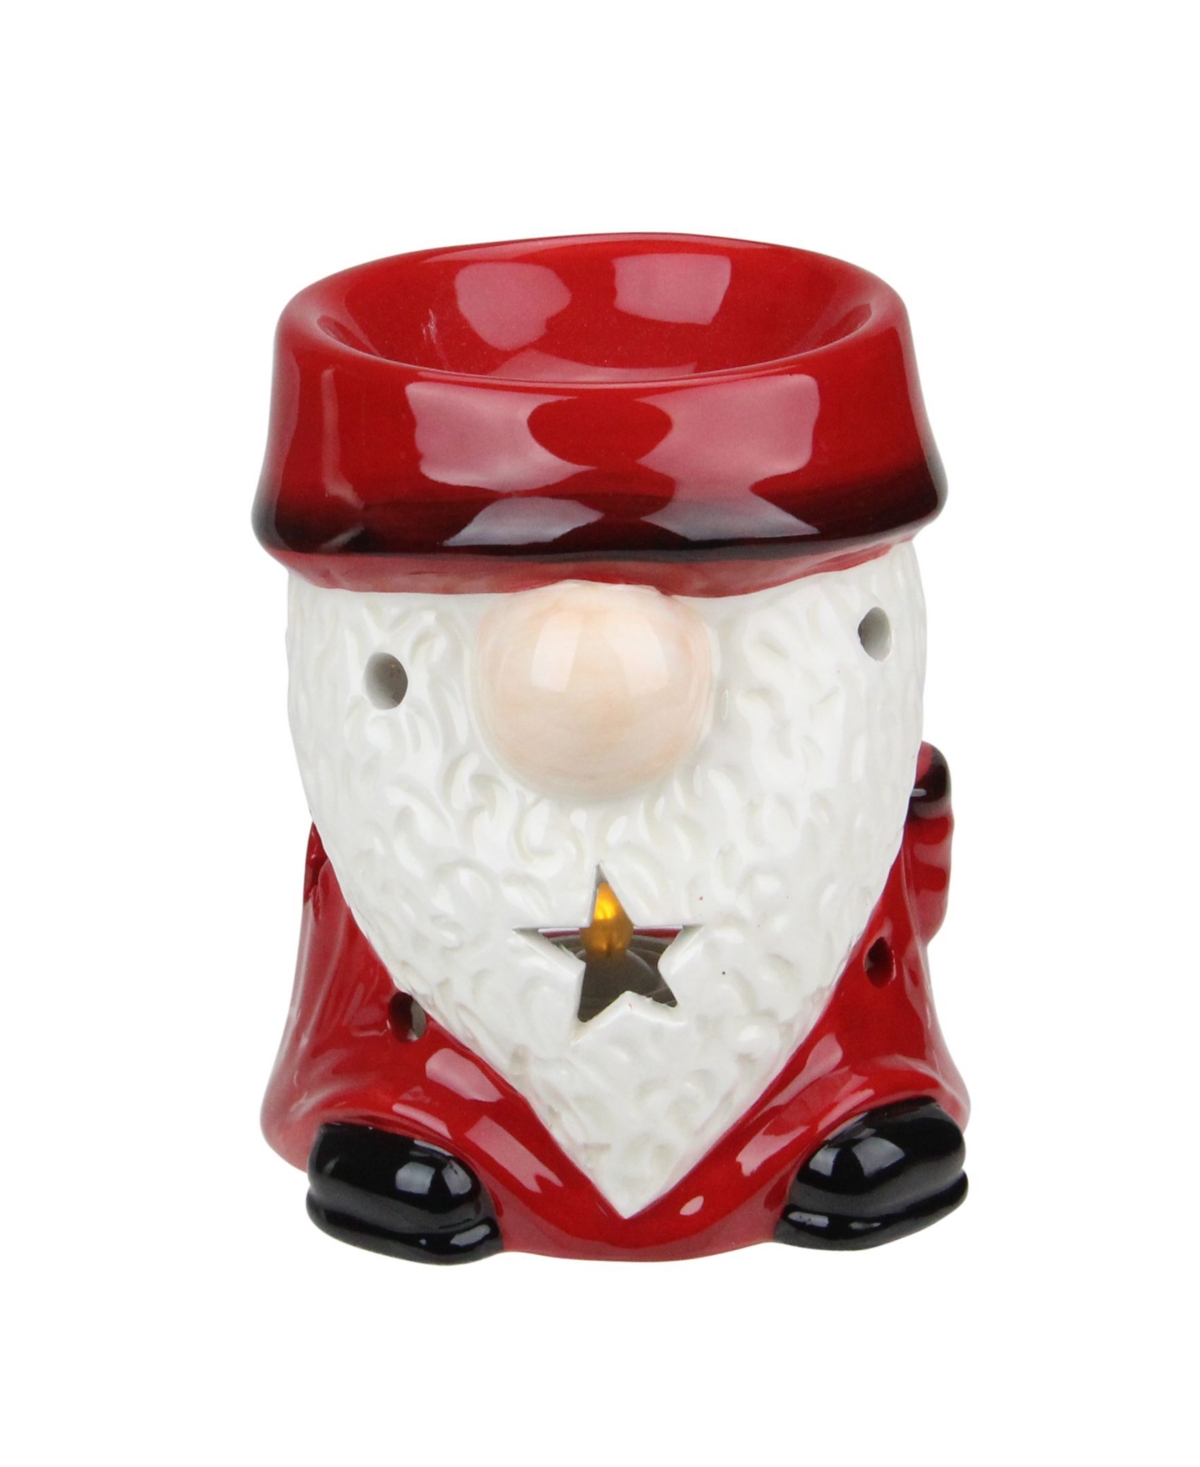 Ceramic Christmas Star Gnome Tealight Candle Holder - Red